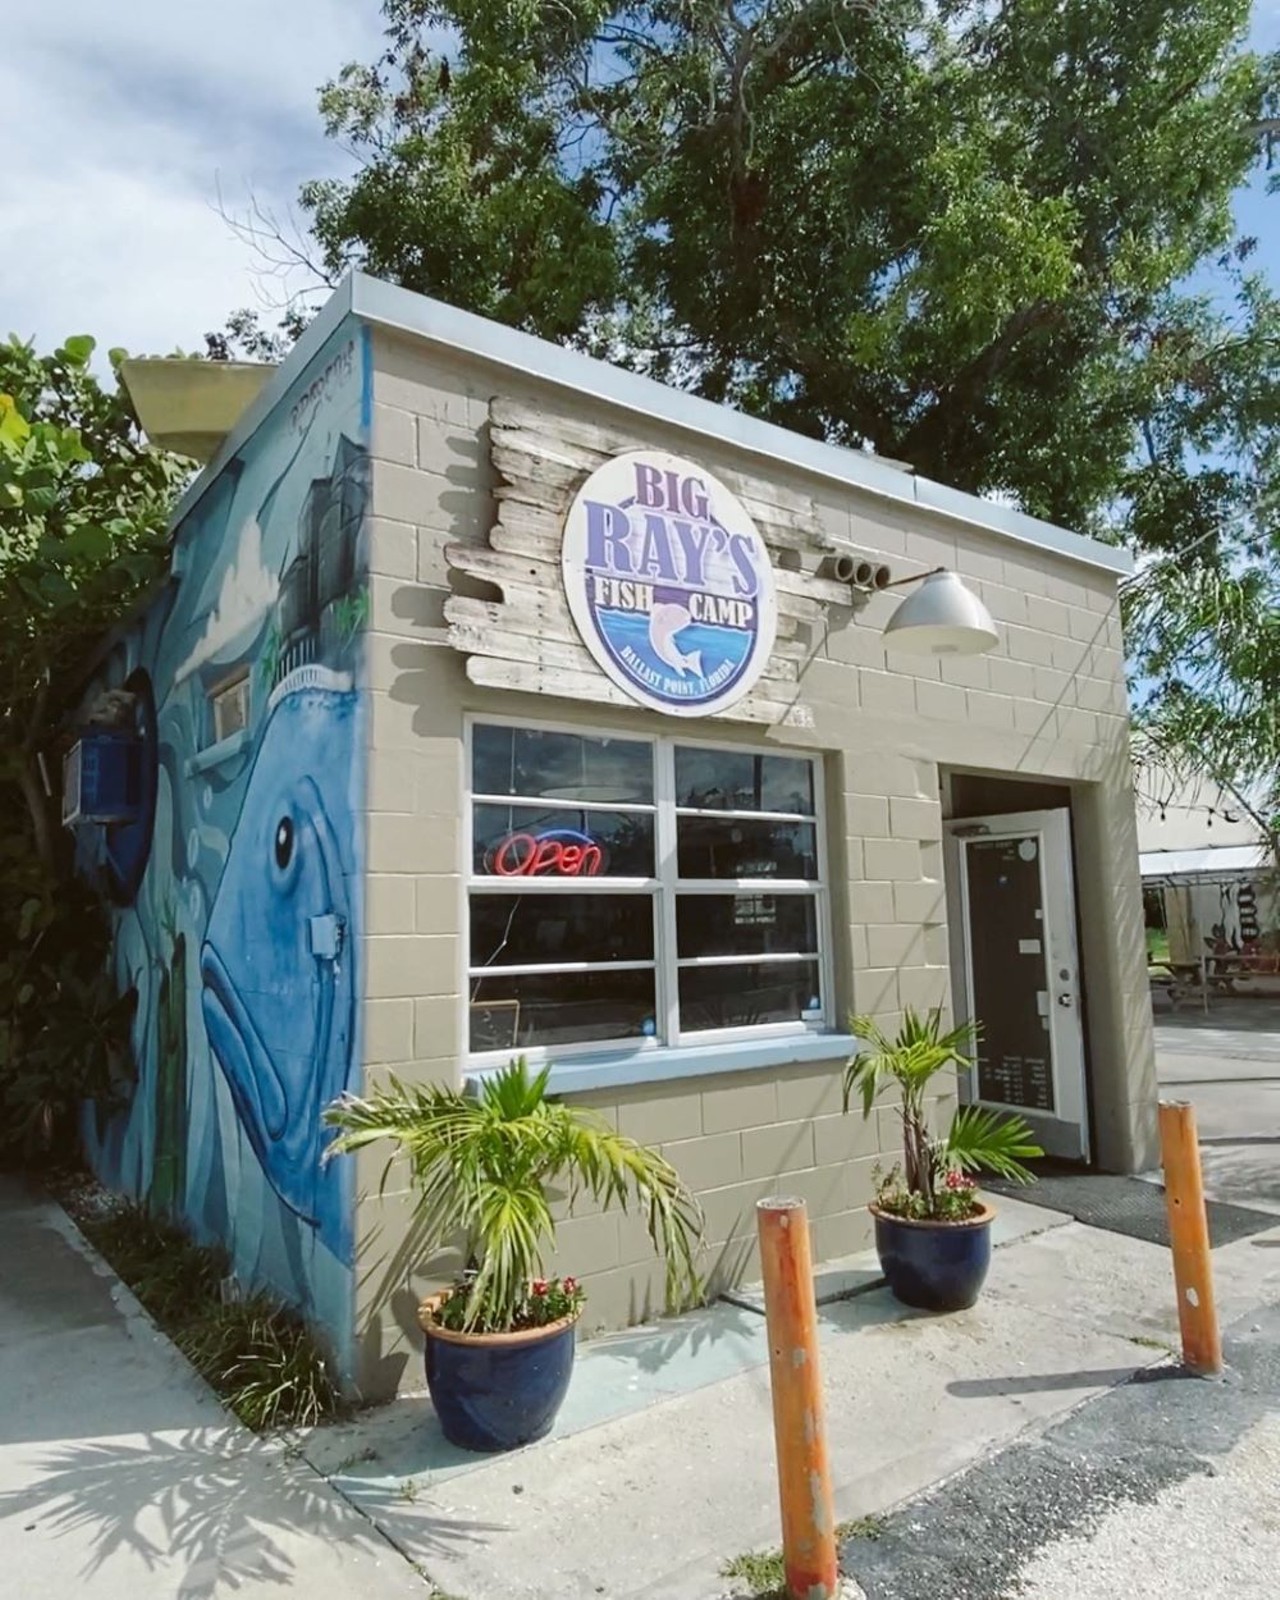 Big Ray’s Fish Camp
Multiple Locations
Known for devil crab and lobster corn dogs, Big Ray’s is probably the best and safest spot to get an authentic grouper sandwich in Tampa. The spot was featured on the Canadian food network on the show “Big Food Bucket List” and has been around since 2015.
Photo via Big Ray’s Fish Camp/Facebook